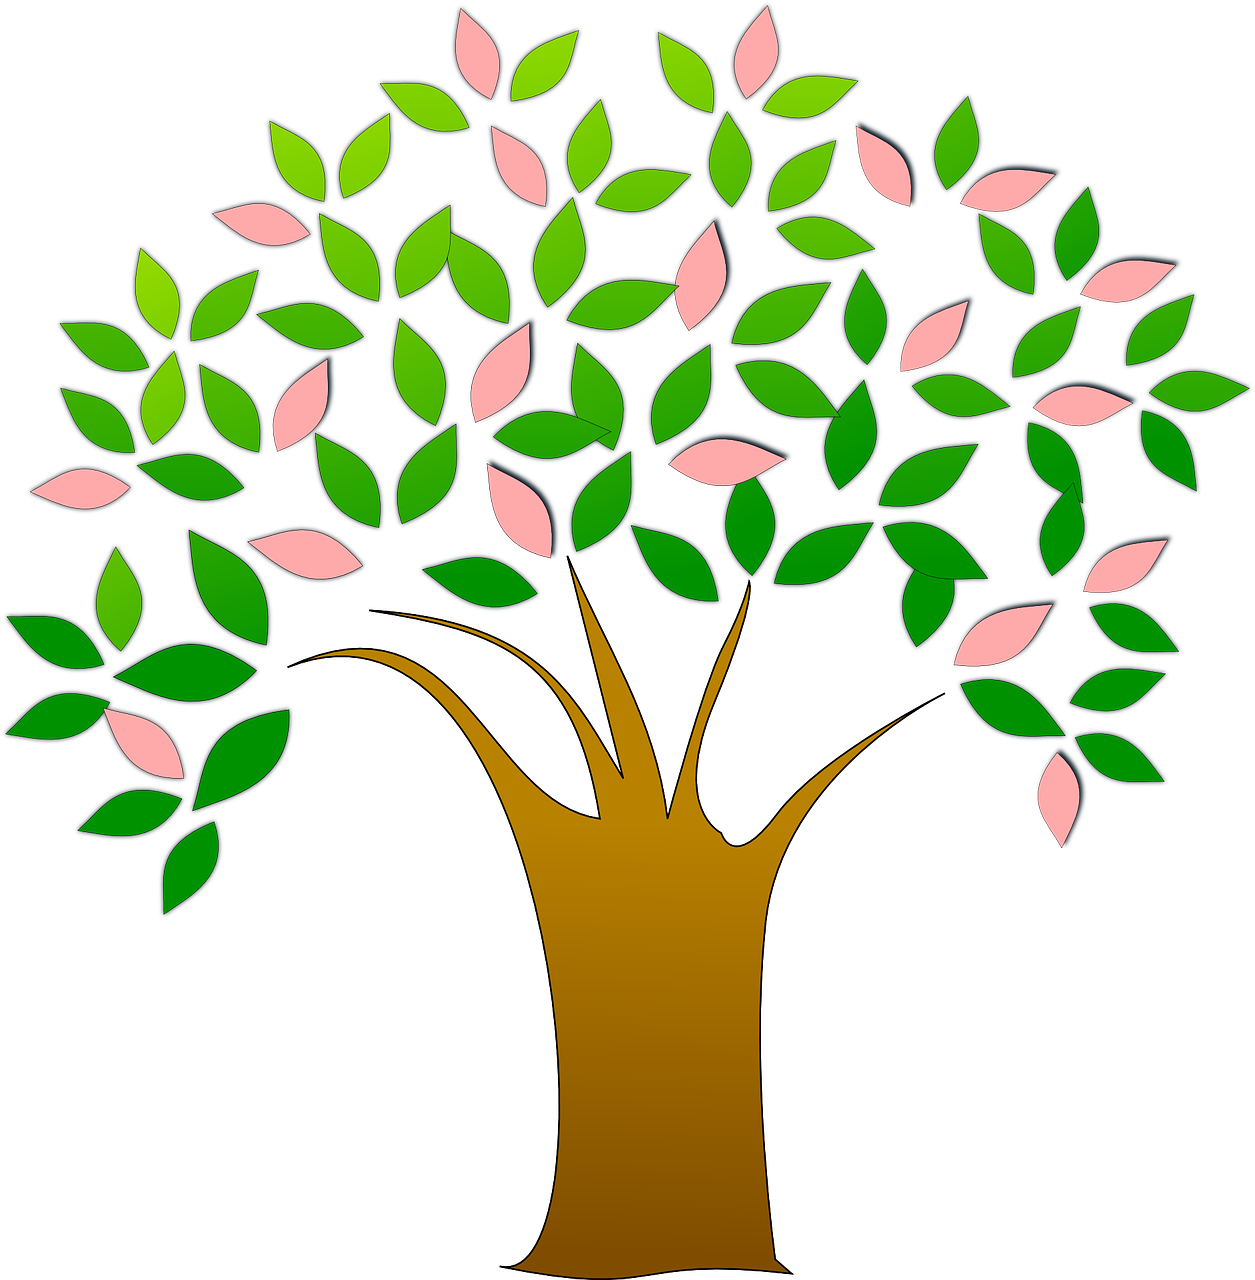 Online Collections, Public Domain, Photo Editing, Online - Tree Logo Vector Png (1255x1280)